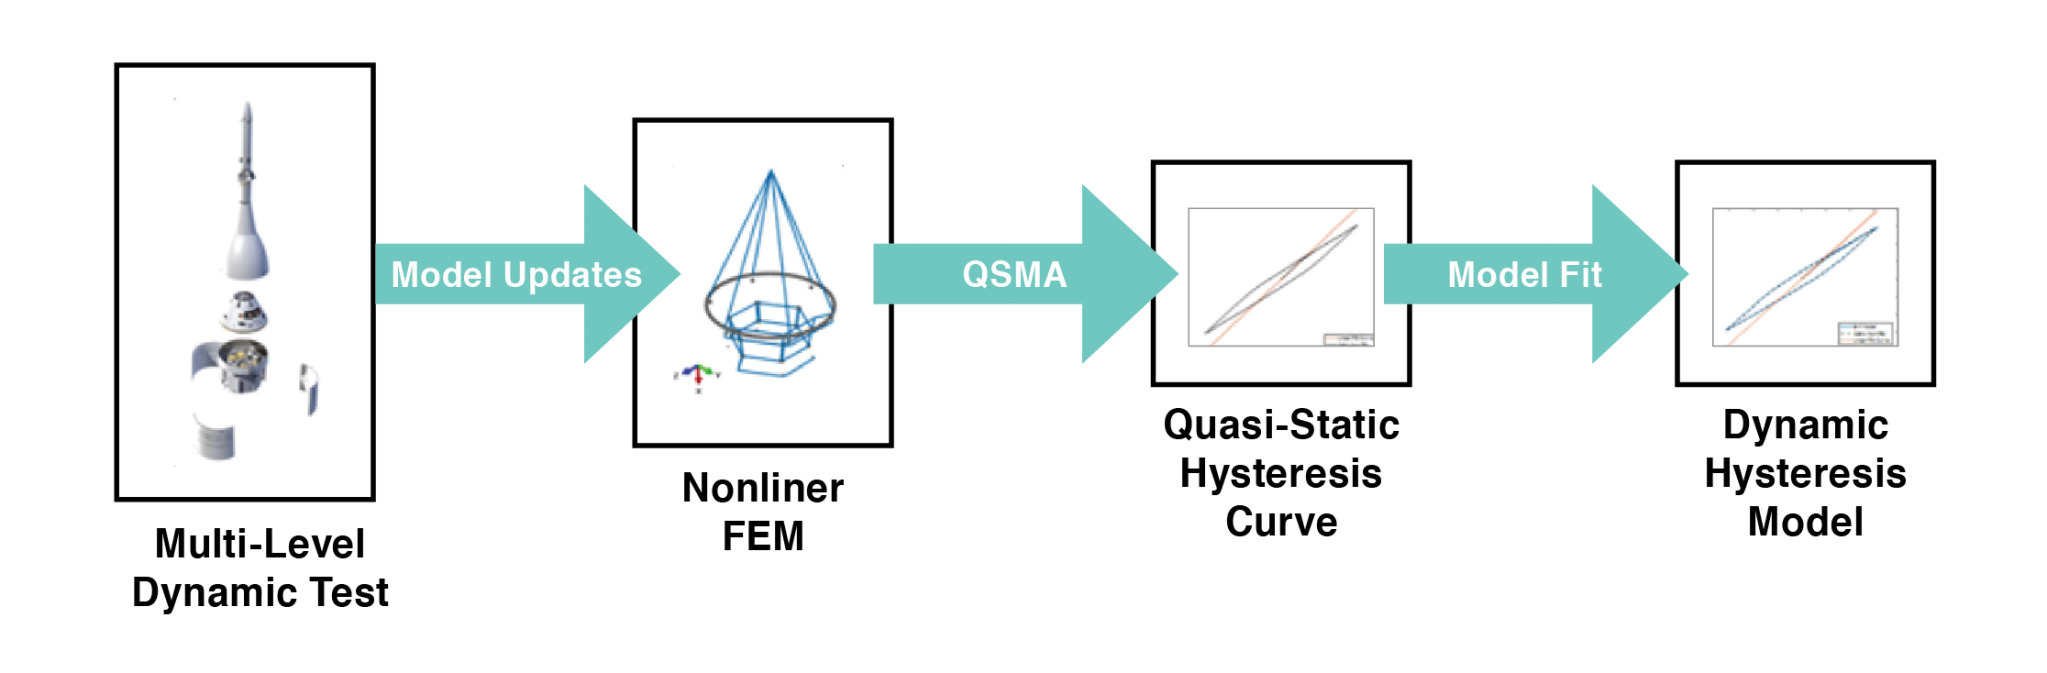 Key steps for construction of uncoupled hysteretic modal equations of motion using a nonlinear FEM. 